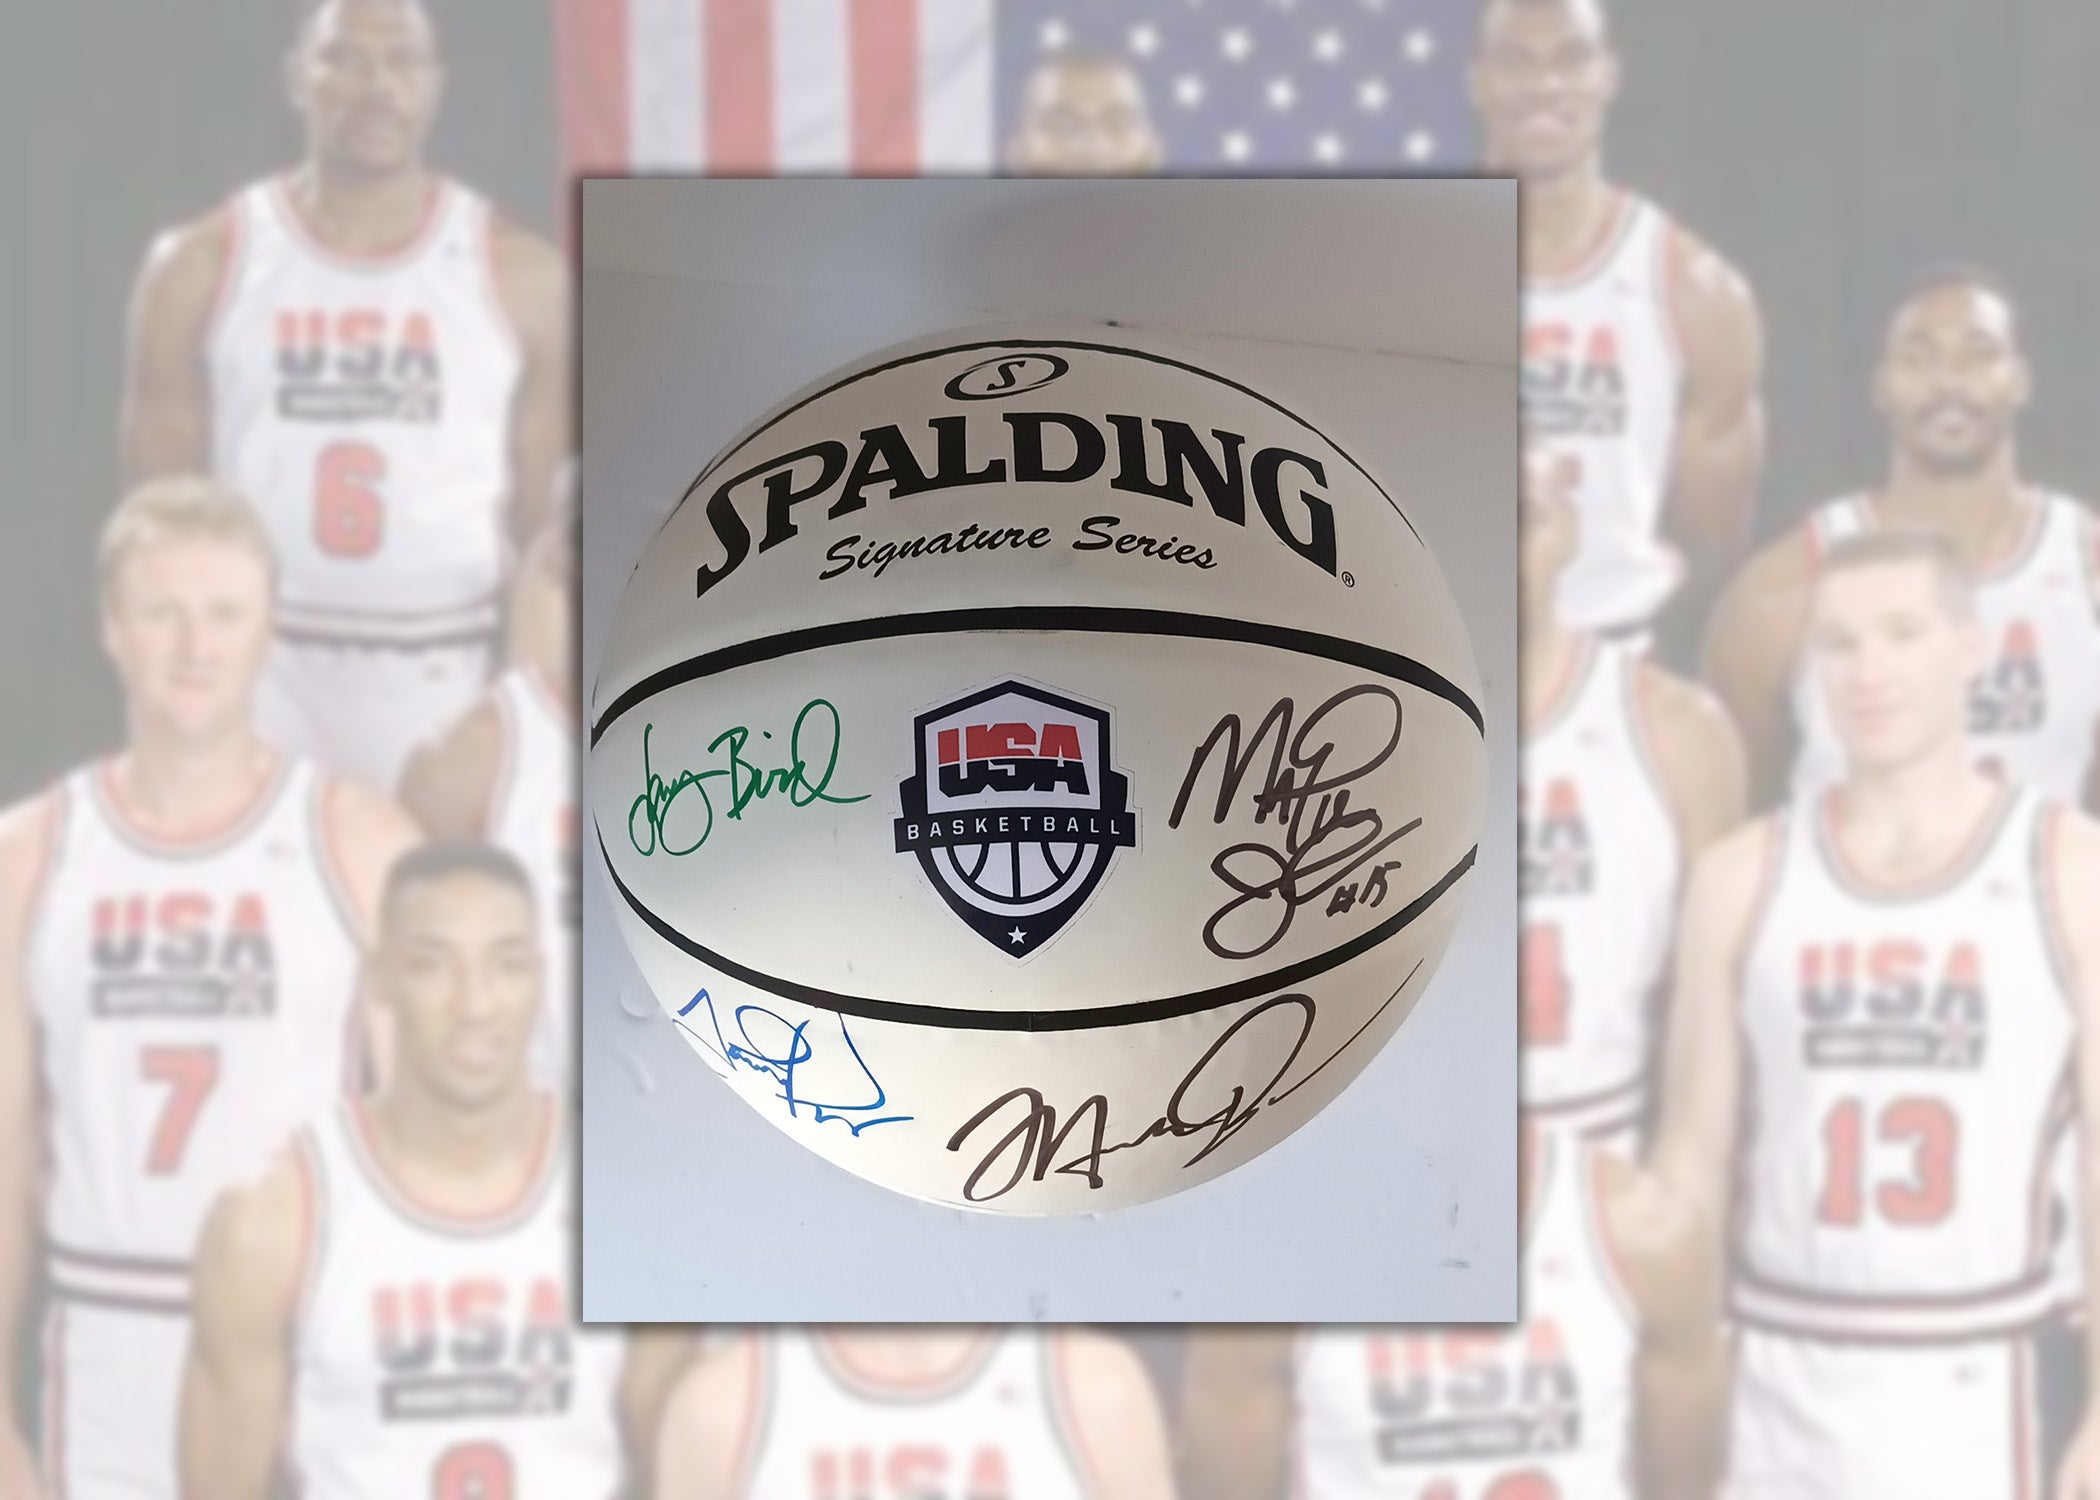 Larry Bird and Magic Johnson Signed Basketball-Indoor Outdoor at